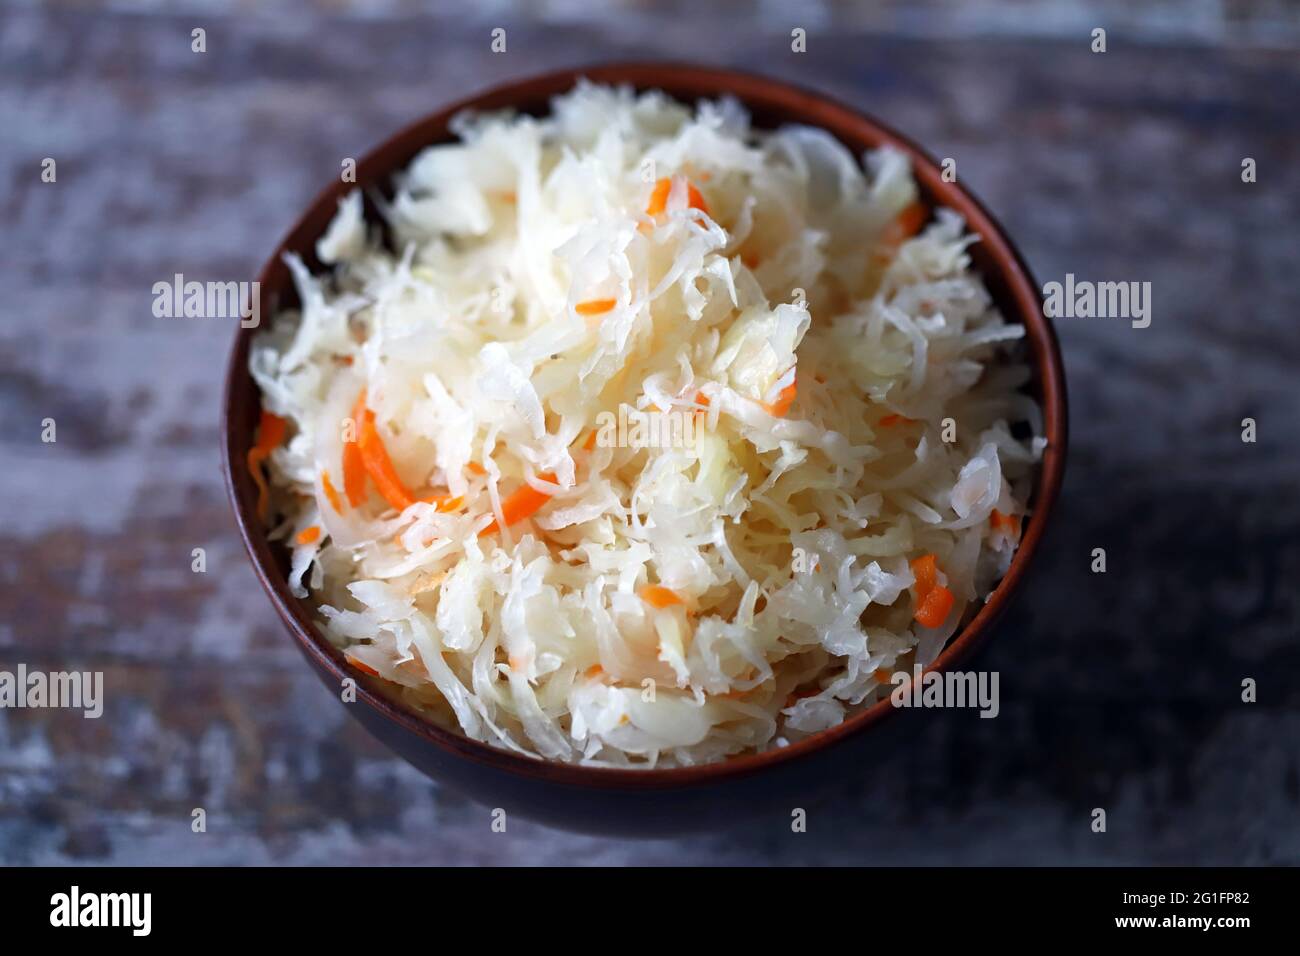 Sauerkraut in a bowl. Probiotics and fermented foods. Stock Photo